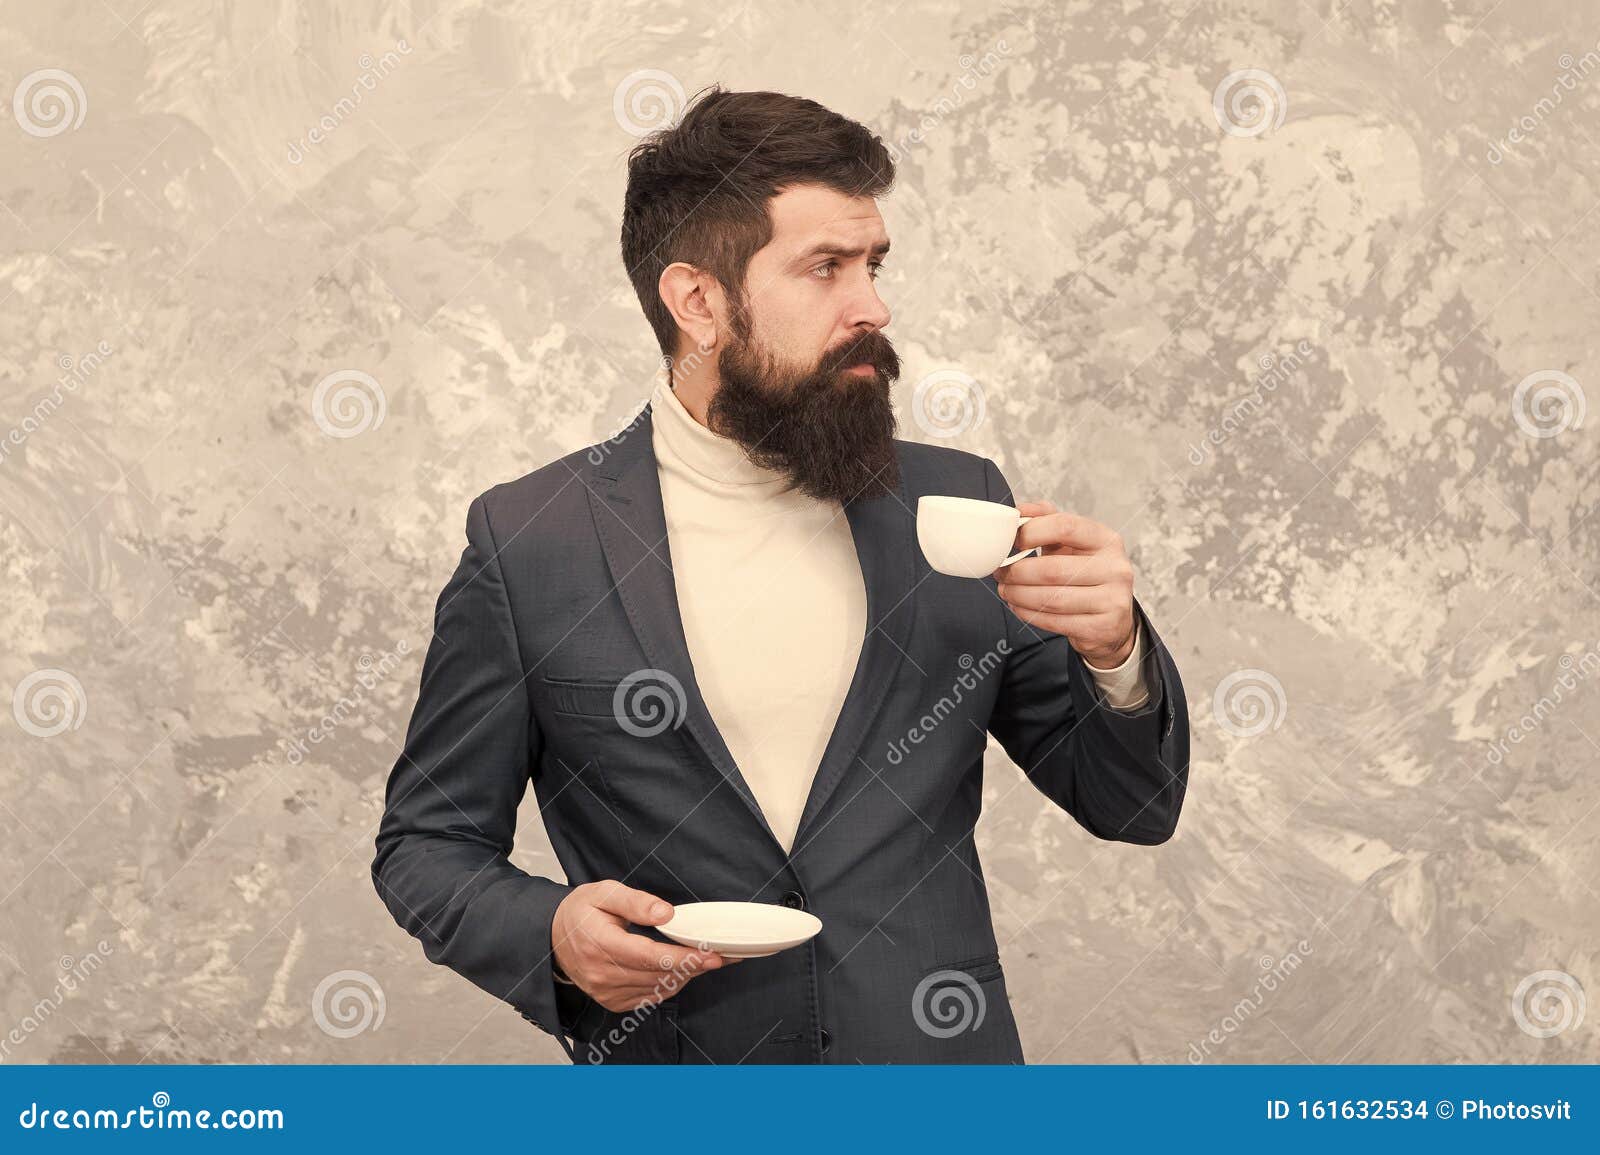 Business People Fashion Style. Smart Casual Style Clothes for Office Life.  Best Coffee Served for Him Stock Photo - Image of outfit, boss: 161632534